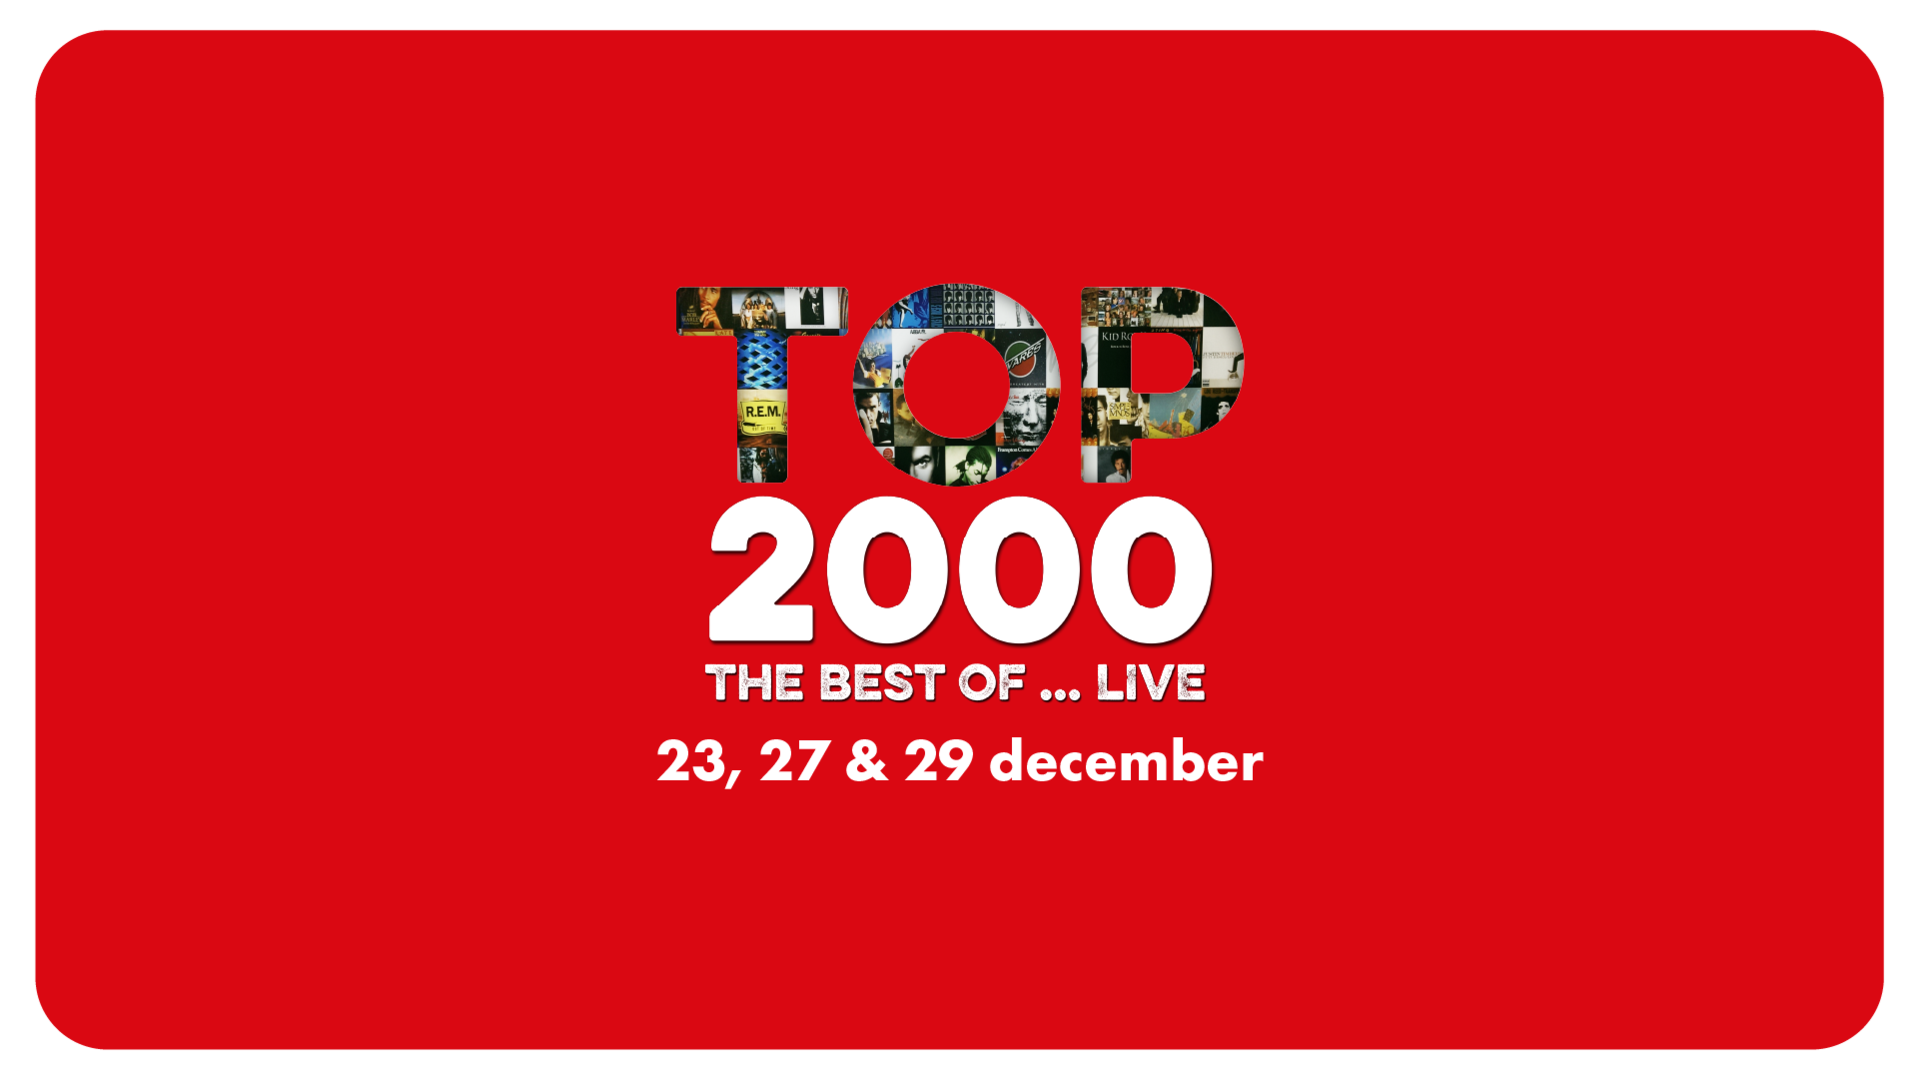 Top2000 the best of...Live!